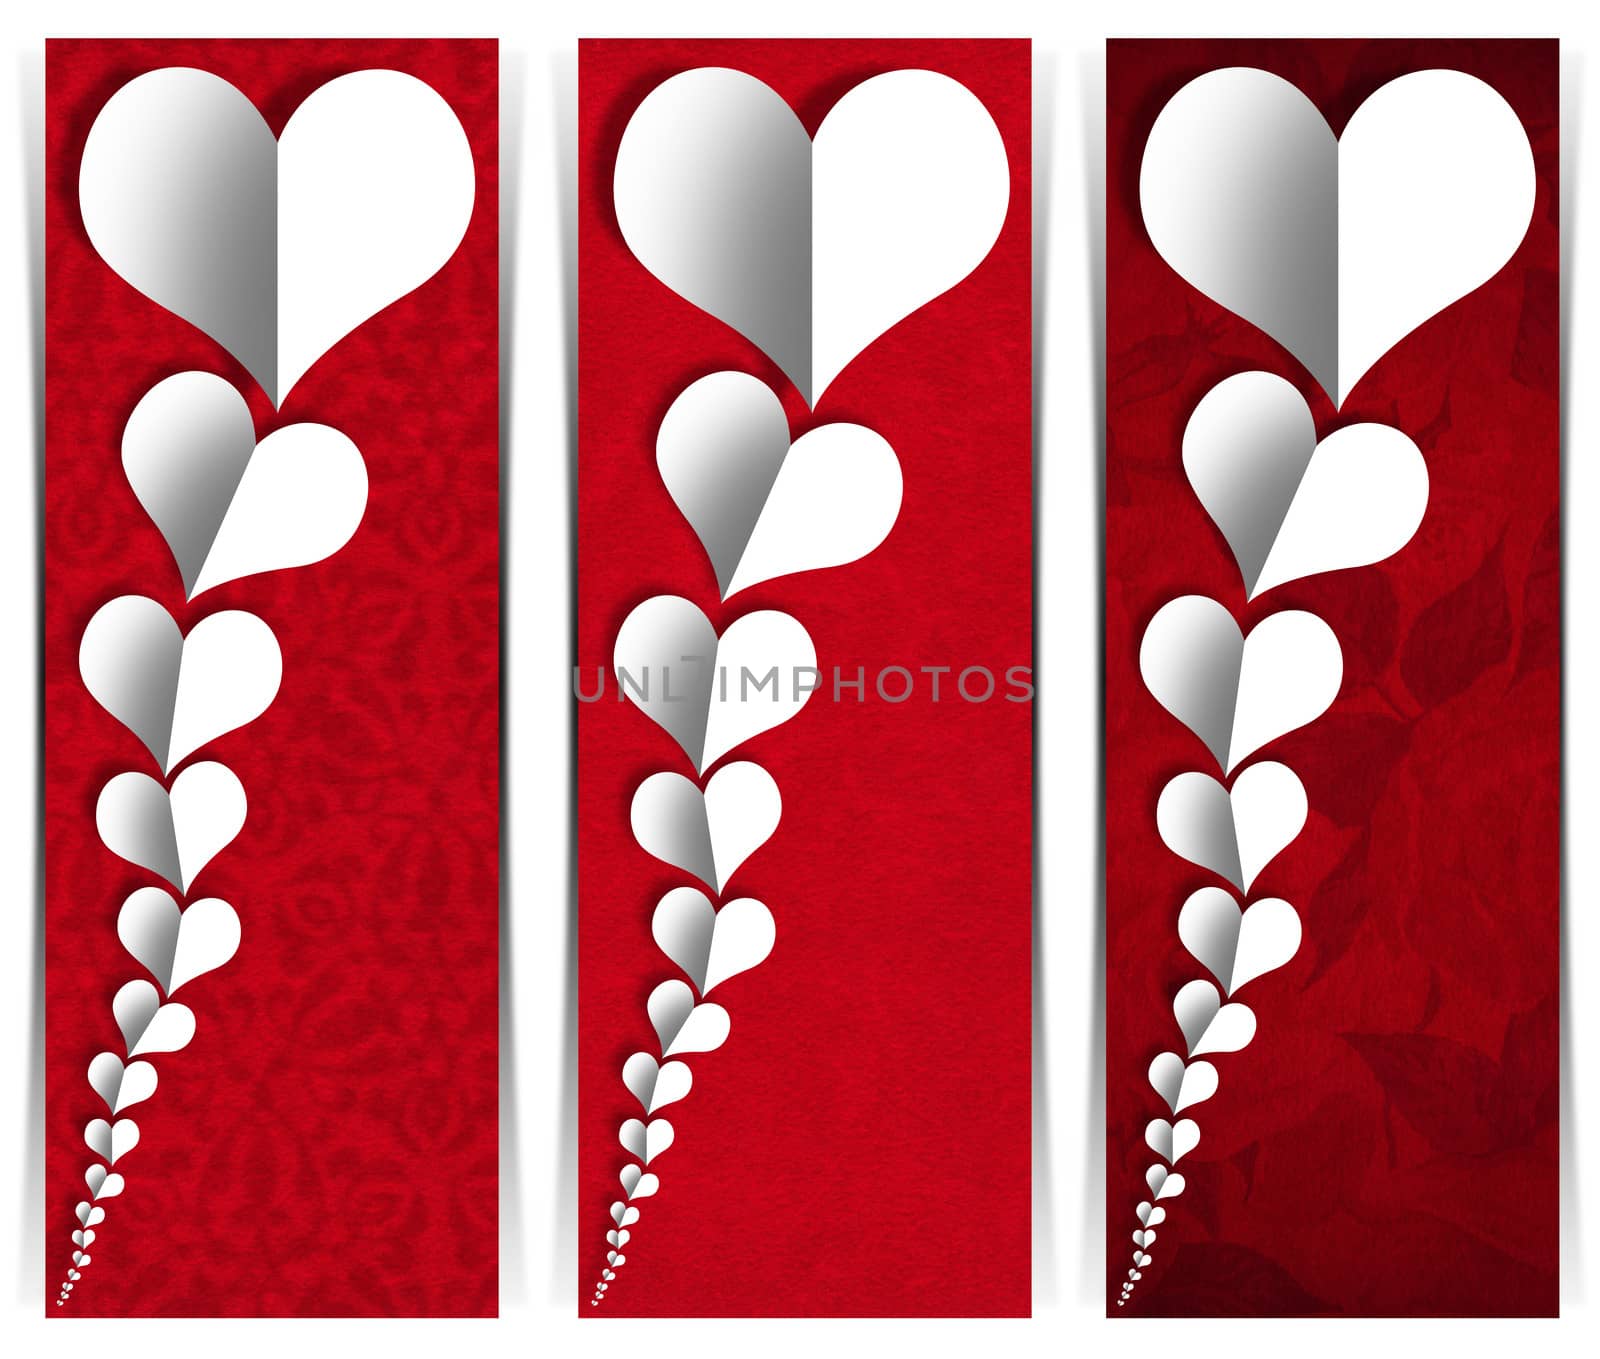 Set of three romantic banners or headers with many stylized hearts in white paper on red velvet background
